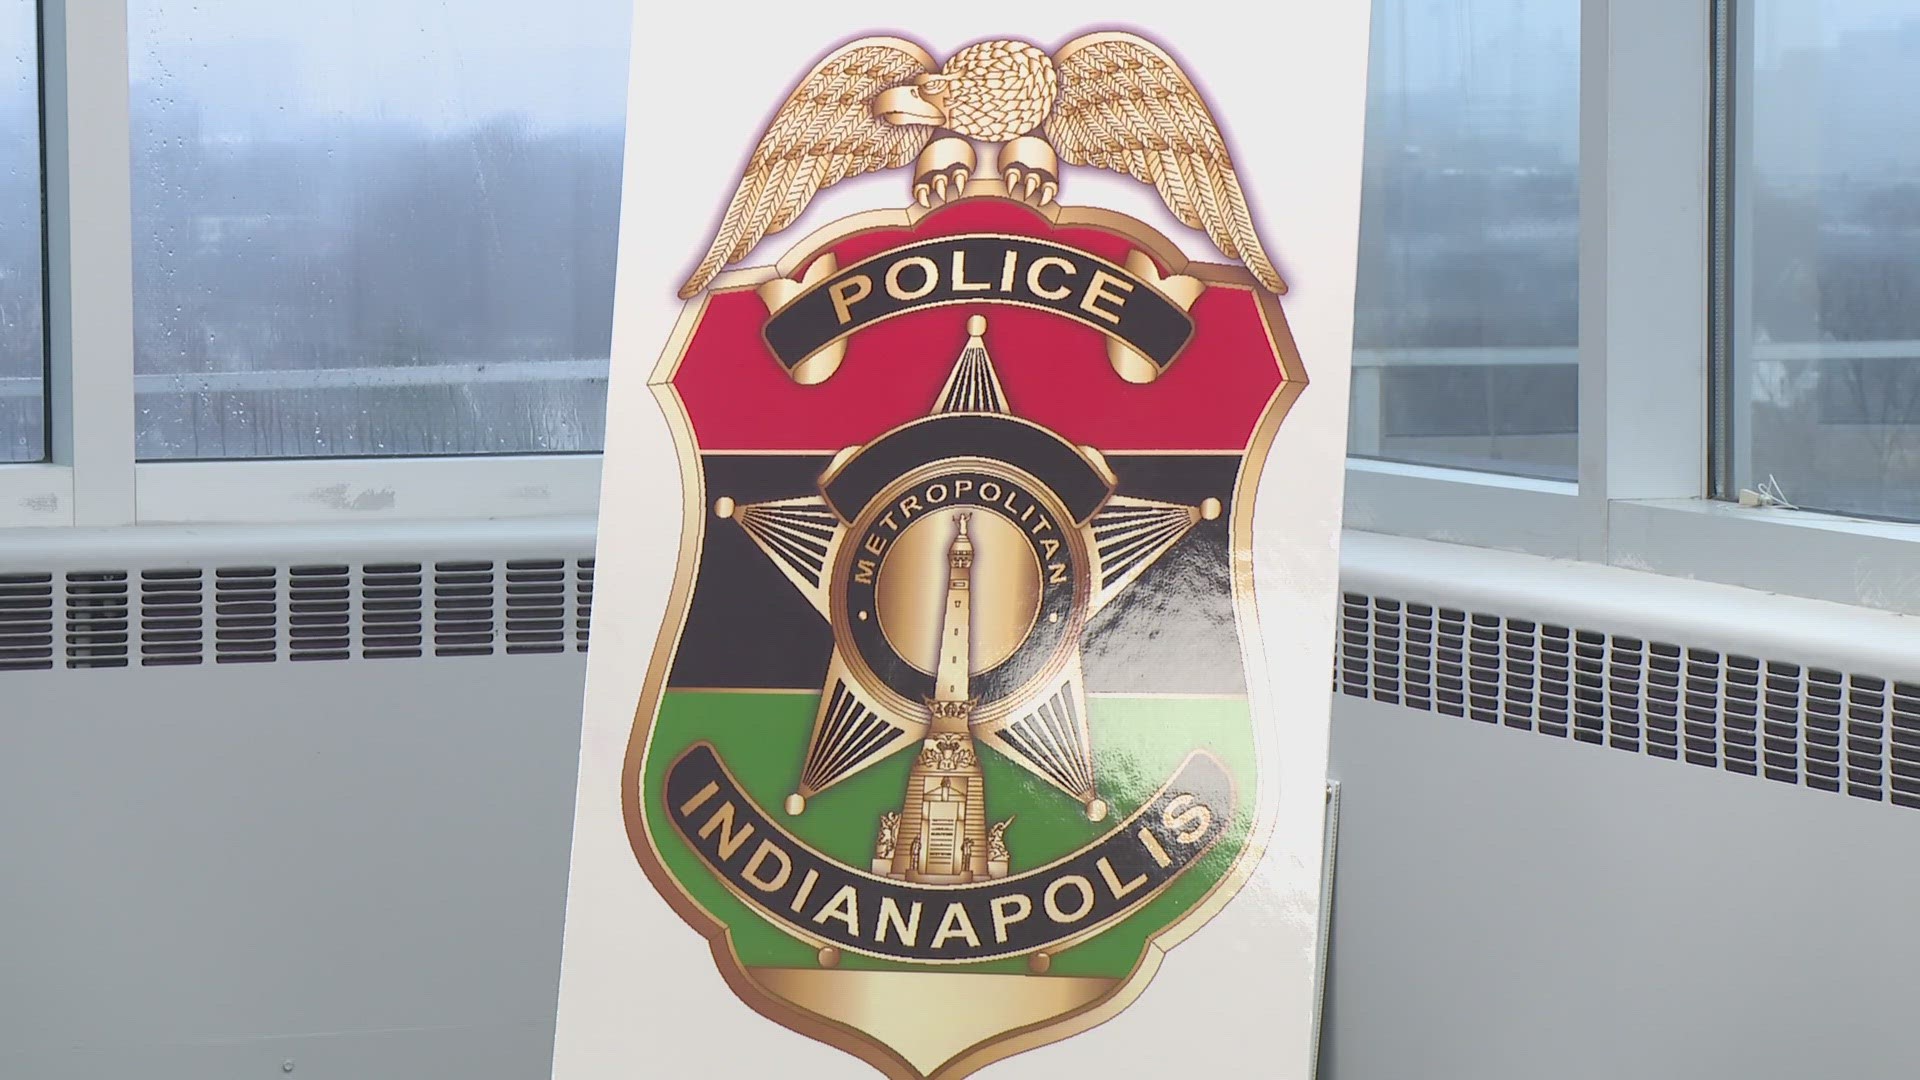 IMPD badges commemorating Black History Month will arrive late